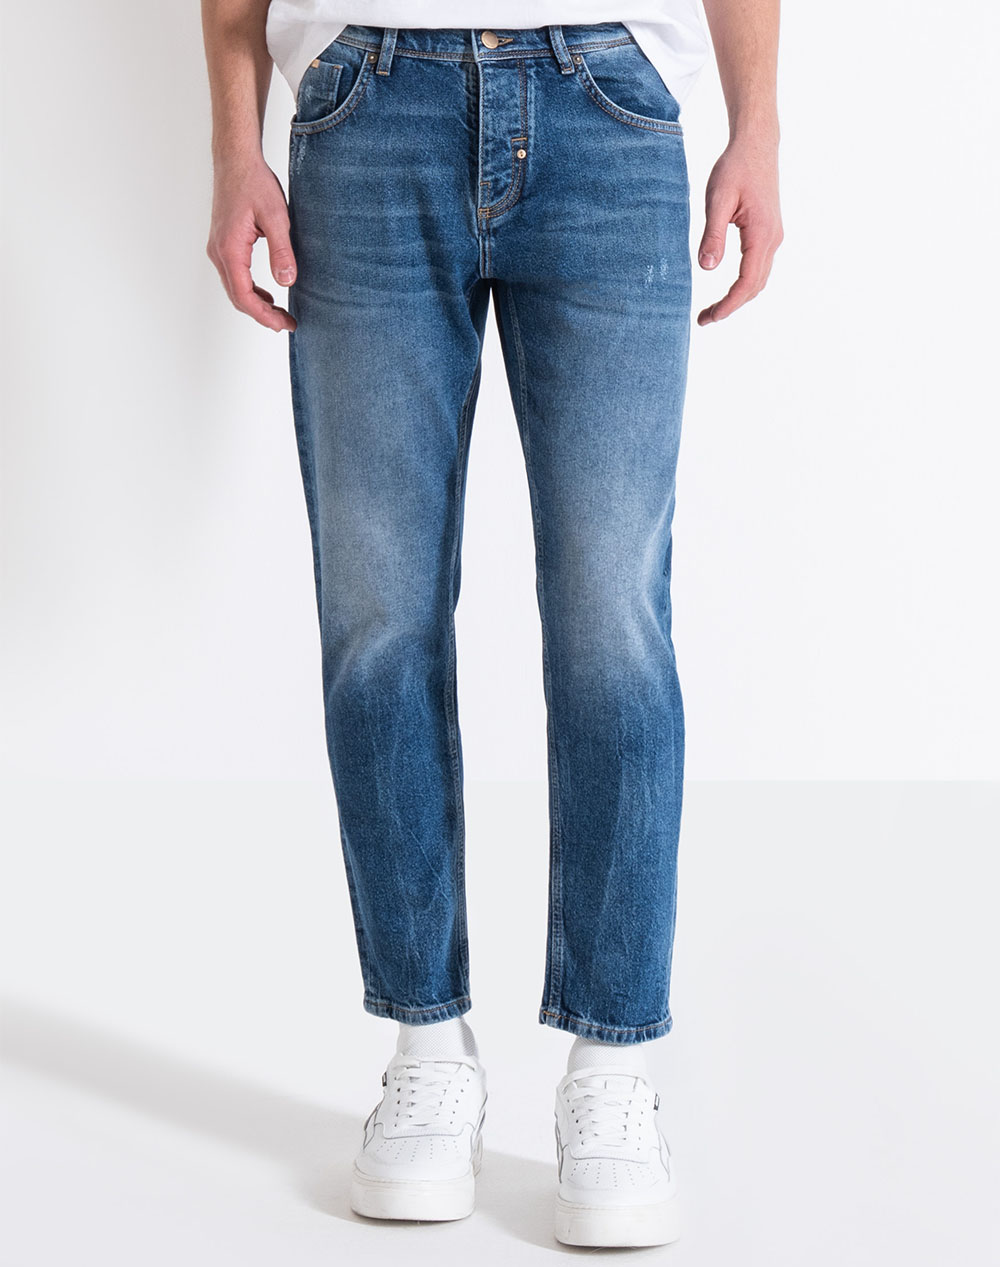 ANTONY MORATO MMDT00264FA7504751W01754 MIN OF 10 JEANS ARGON SLIM ANKLE LENGHT FIT IN BLUE DENIM AUTHENTIC LOOK ΠΑΝΤΕΛΟΝΙ ΑΝΔΡΙΚΟ DT26475475W1754-7010 3820AANTO2010039_5757